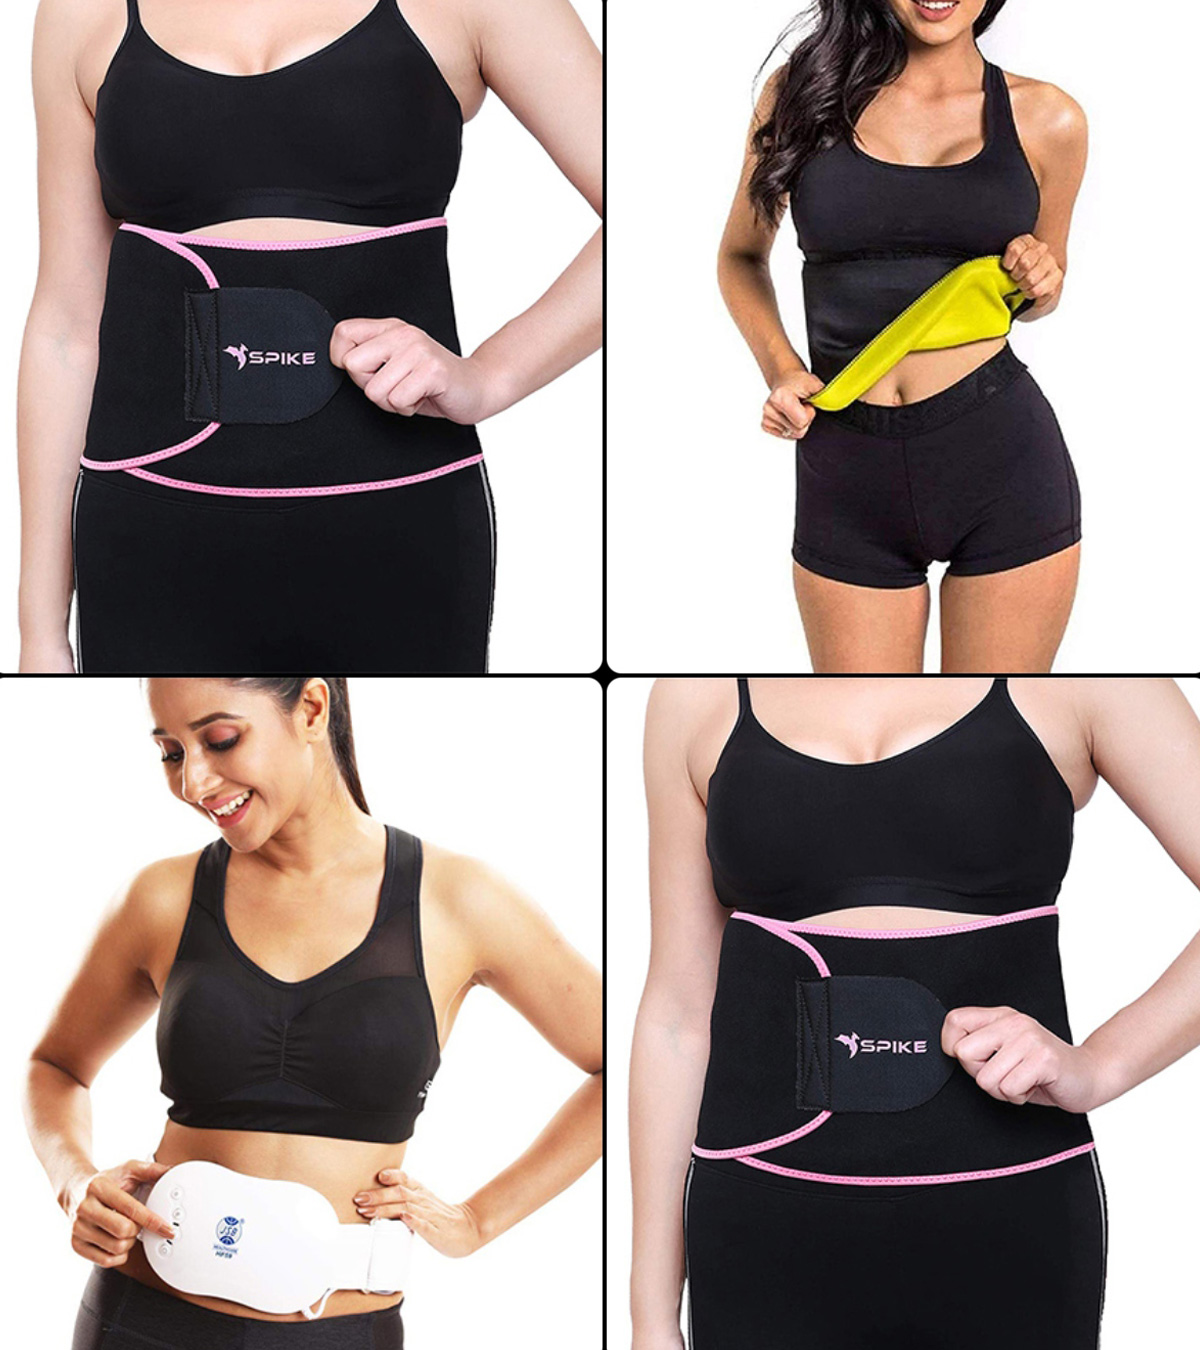 Top Quality Store Original Sweat Slim Belt Tummy Trimmer Belt to Belly  Waist hot Slimming Belly Shaper Weight Loss for Women Fat Buster Home Gym